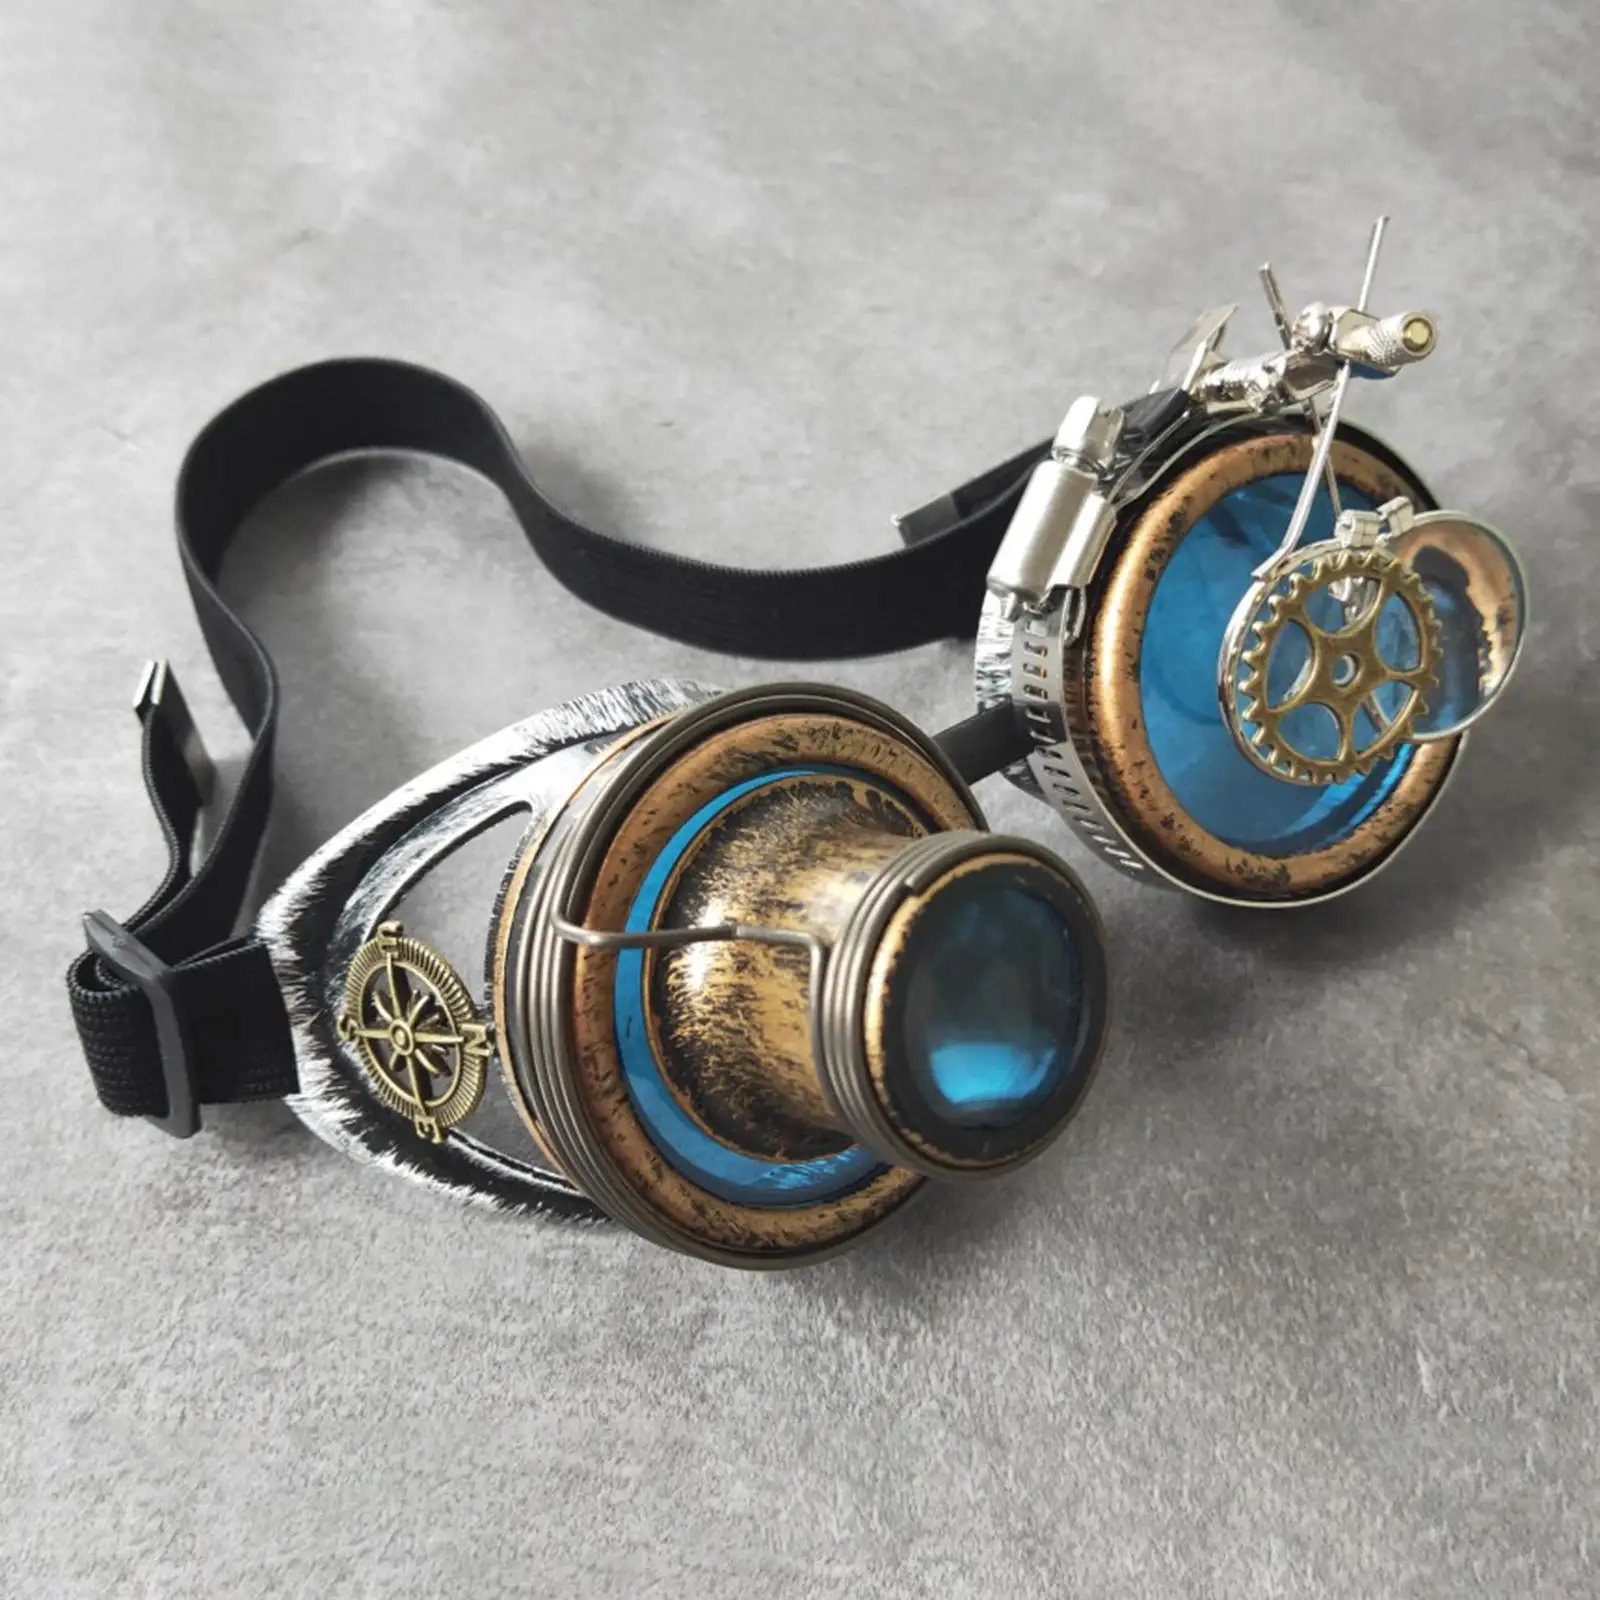 Fashion Steampunk Goggles Blue Punk Rustic Women Men Sunglasses for Party Photo Prop Costume Eyewear Cosplay